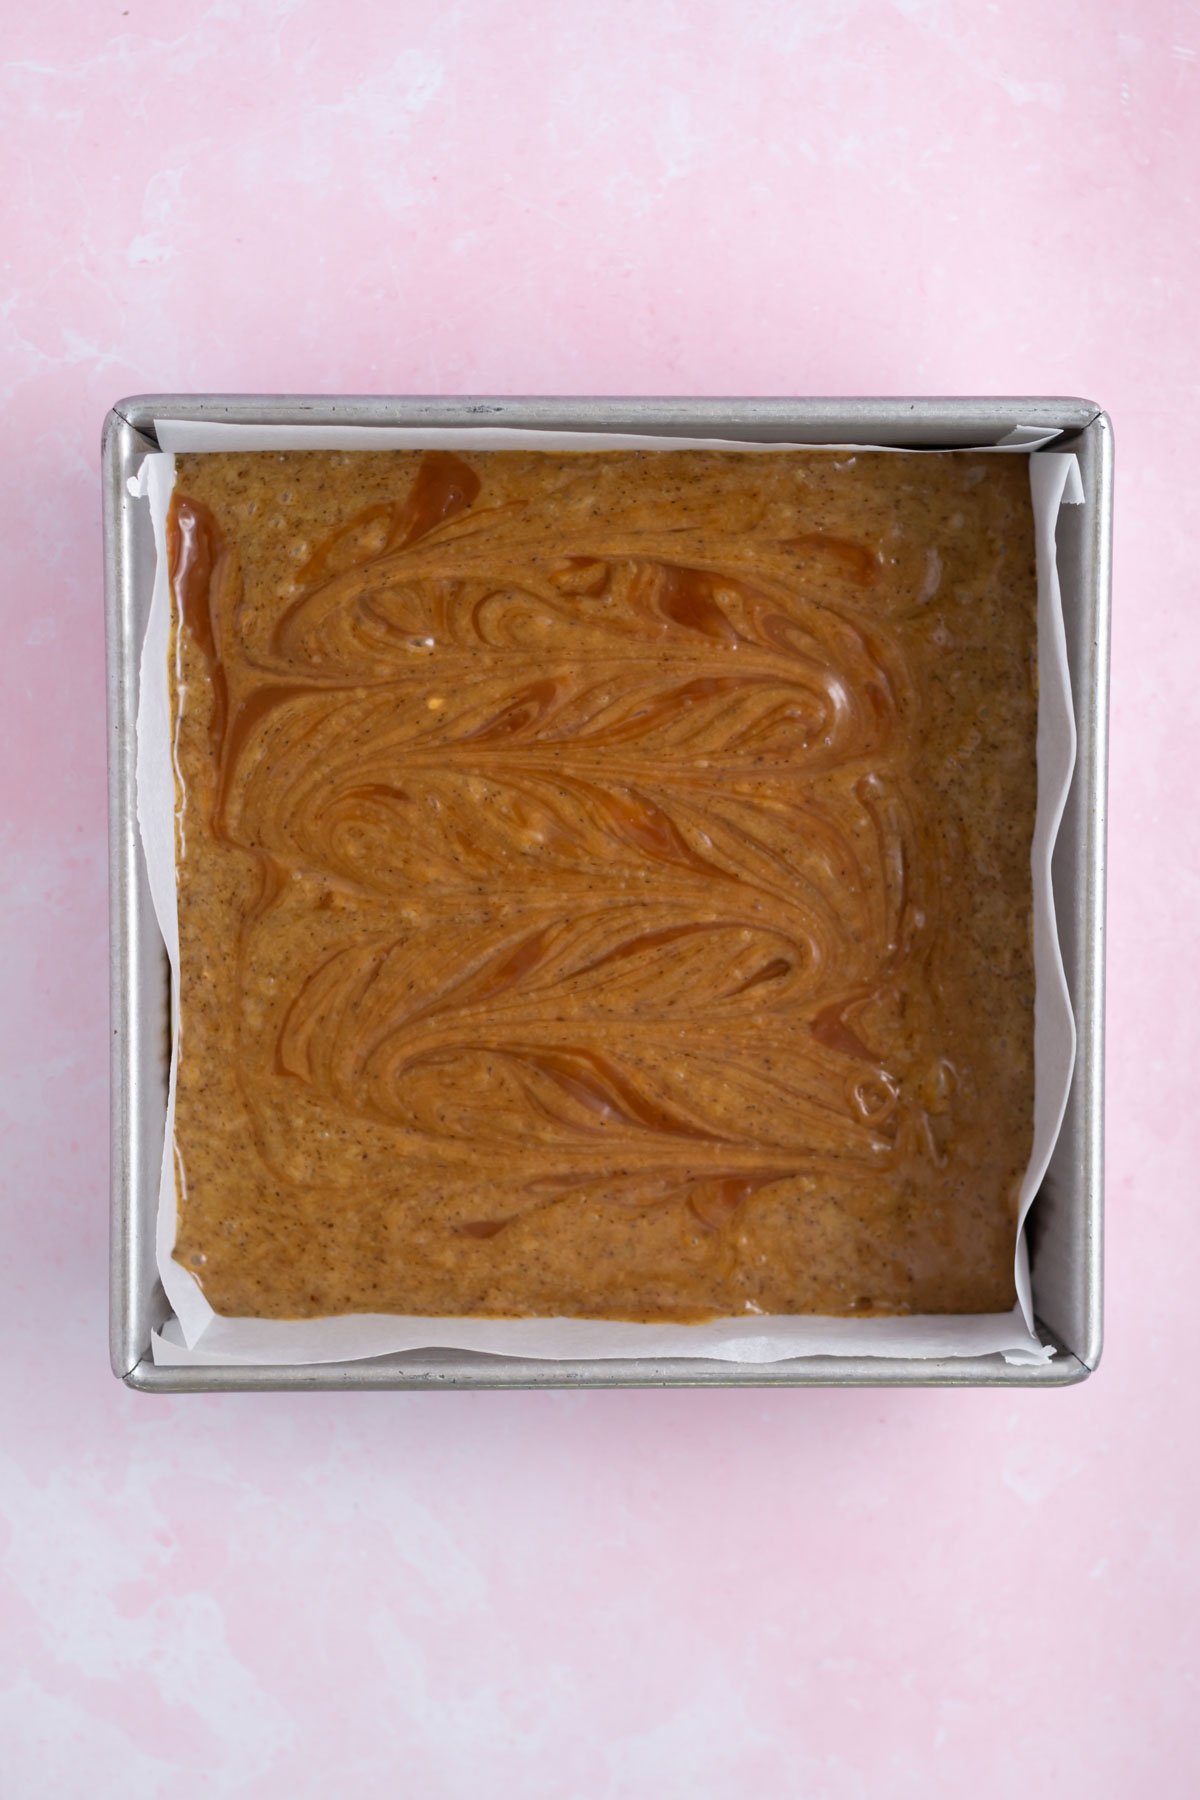 swirled caramel into brownie batter in a baking pan